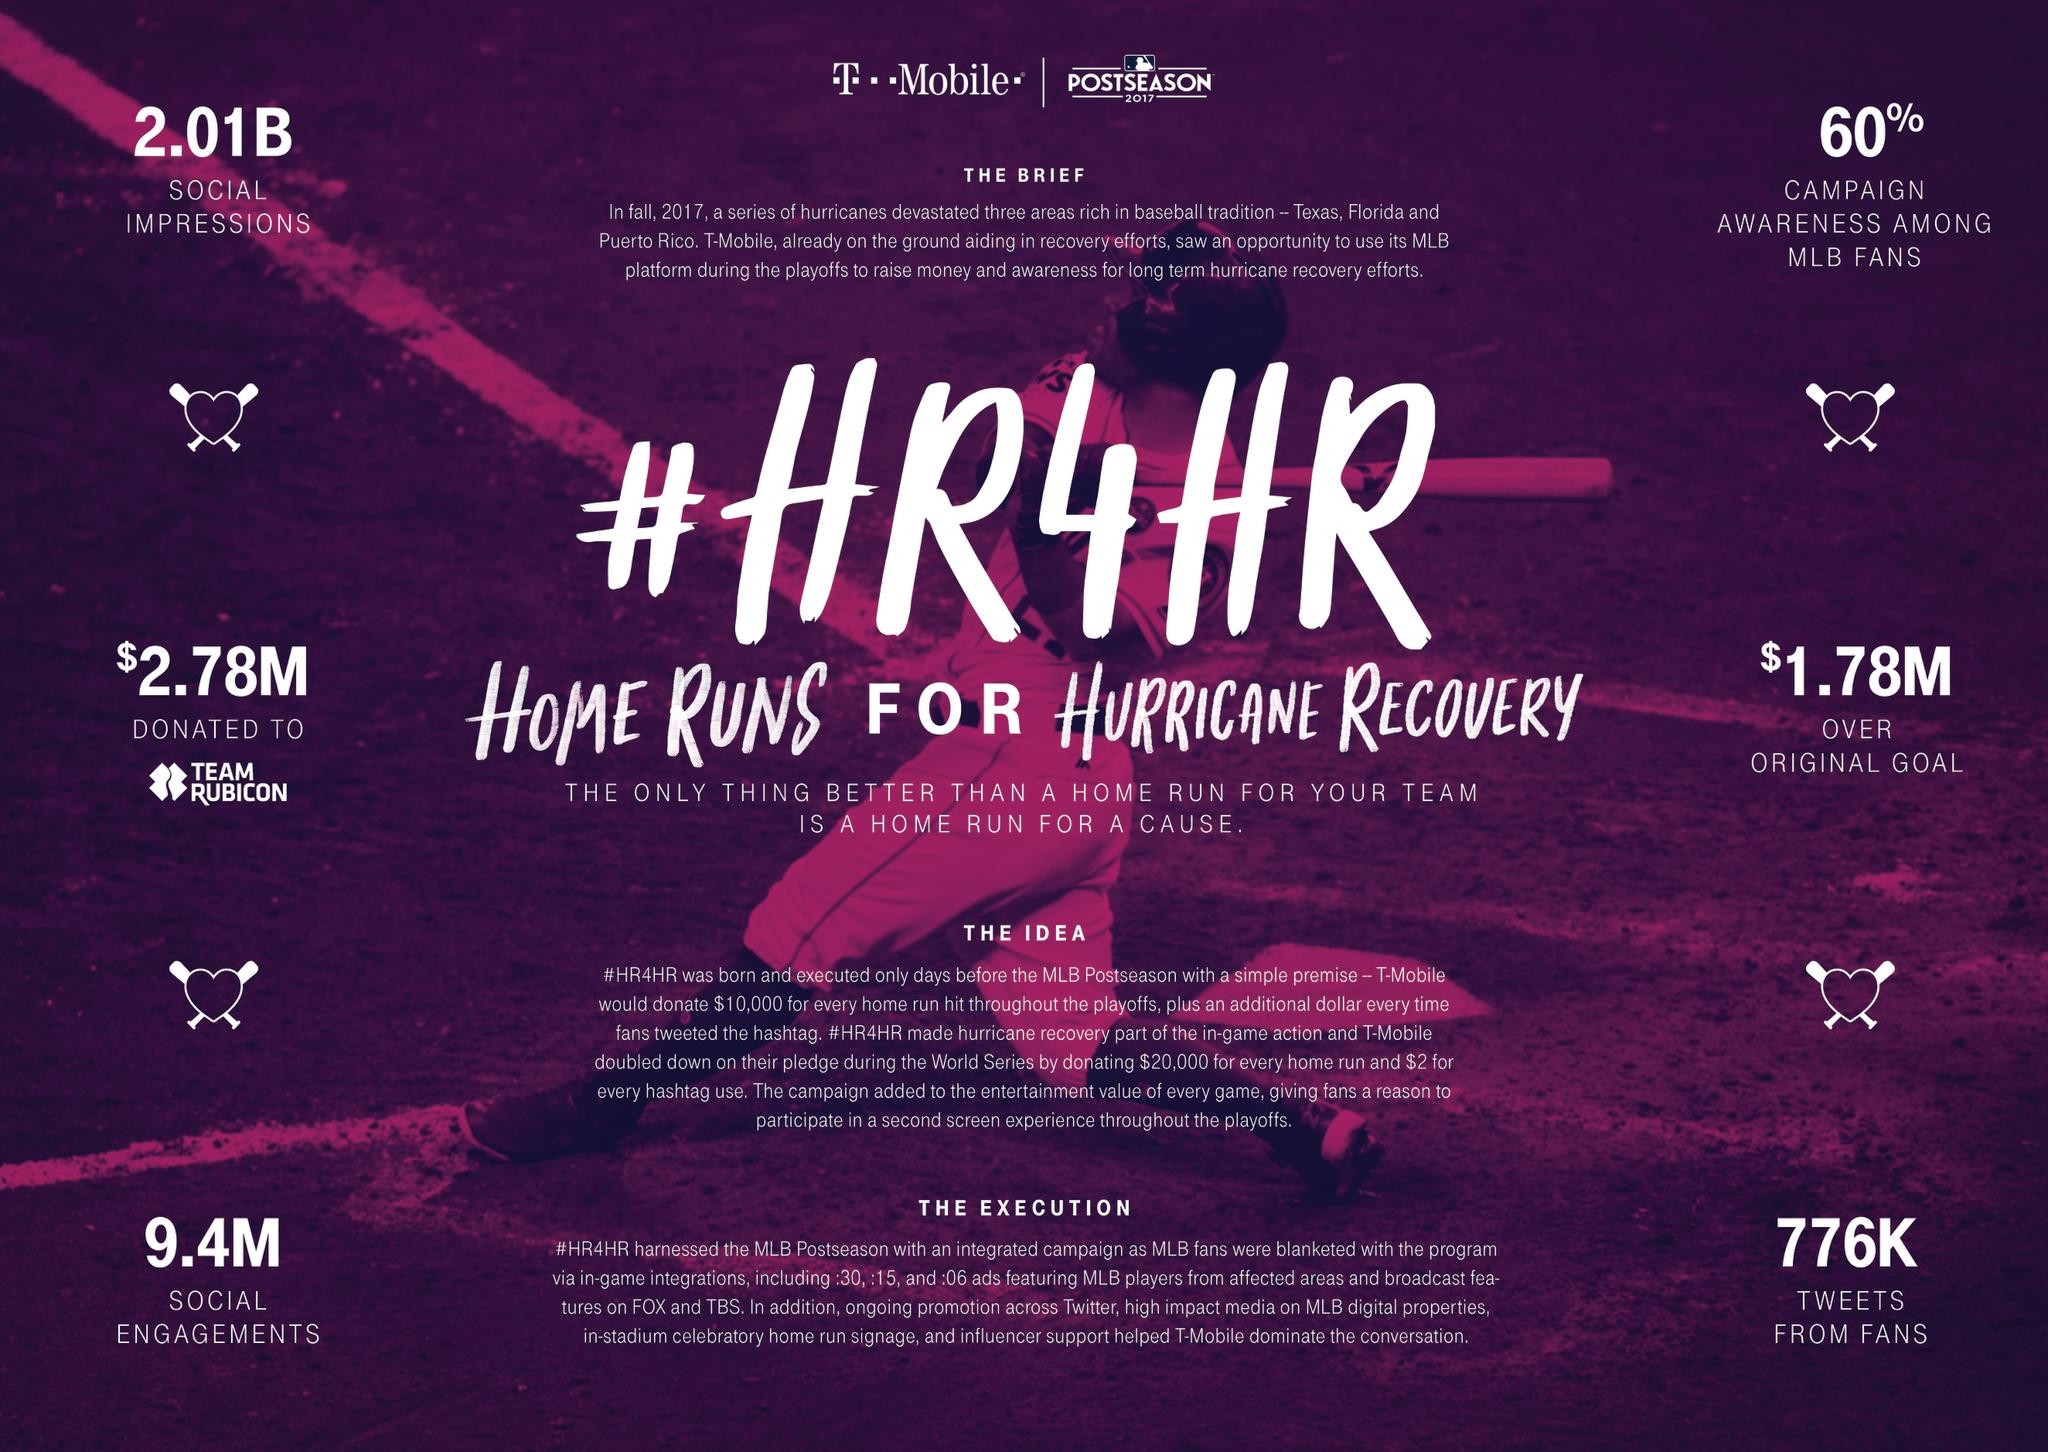 #HR4HR: HOME RUNS FOR HURRICANE RECOVERY